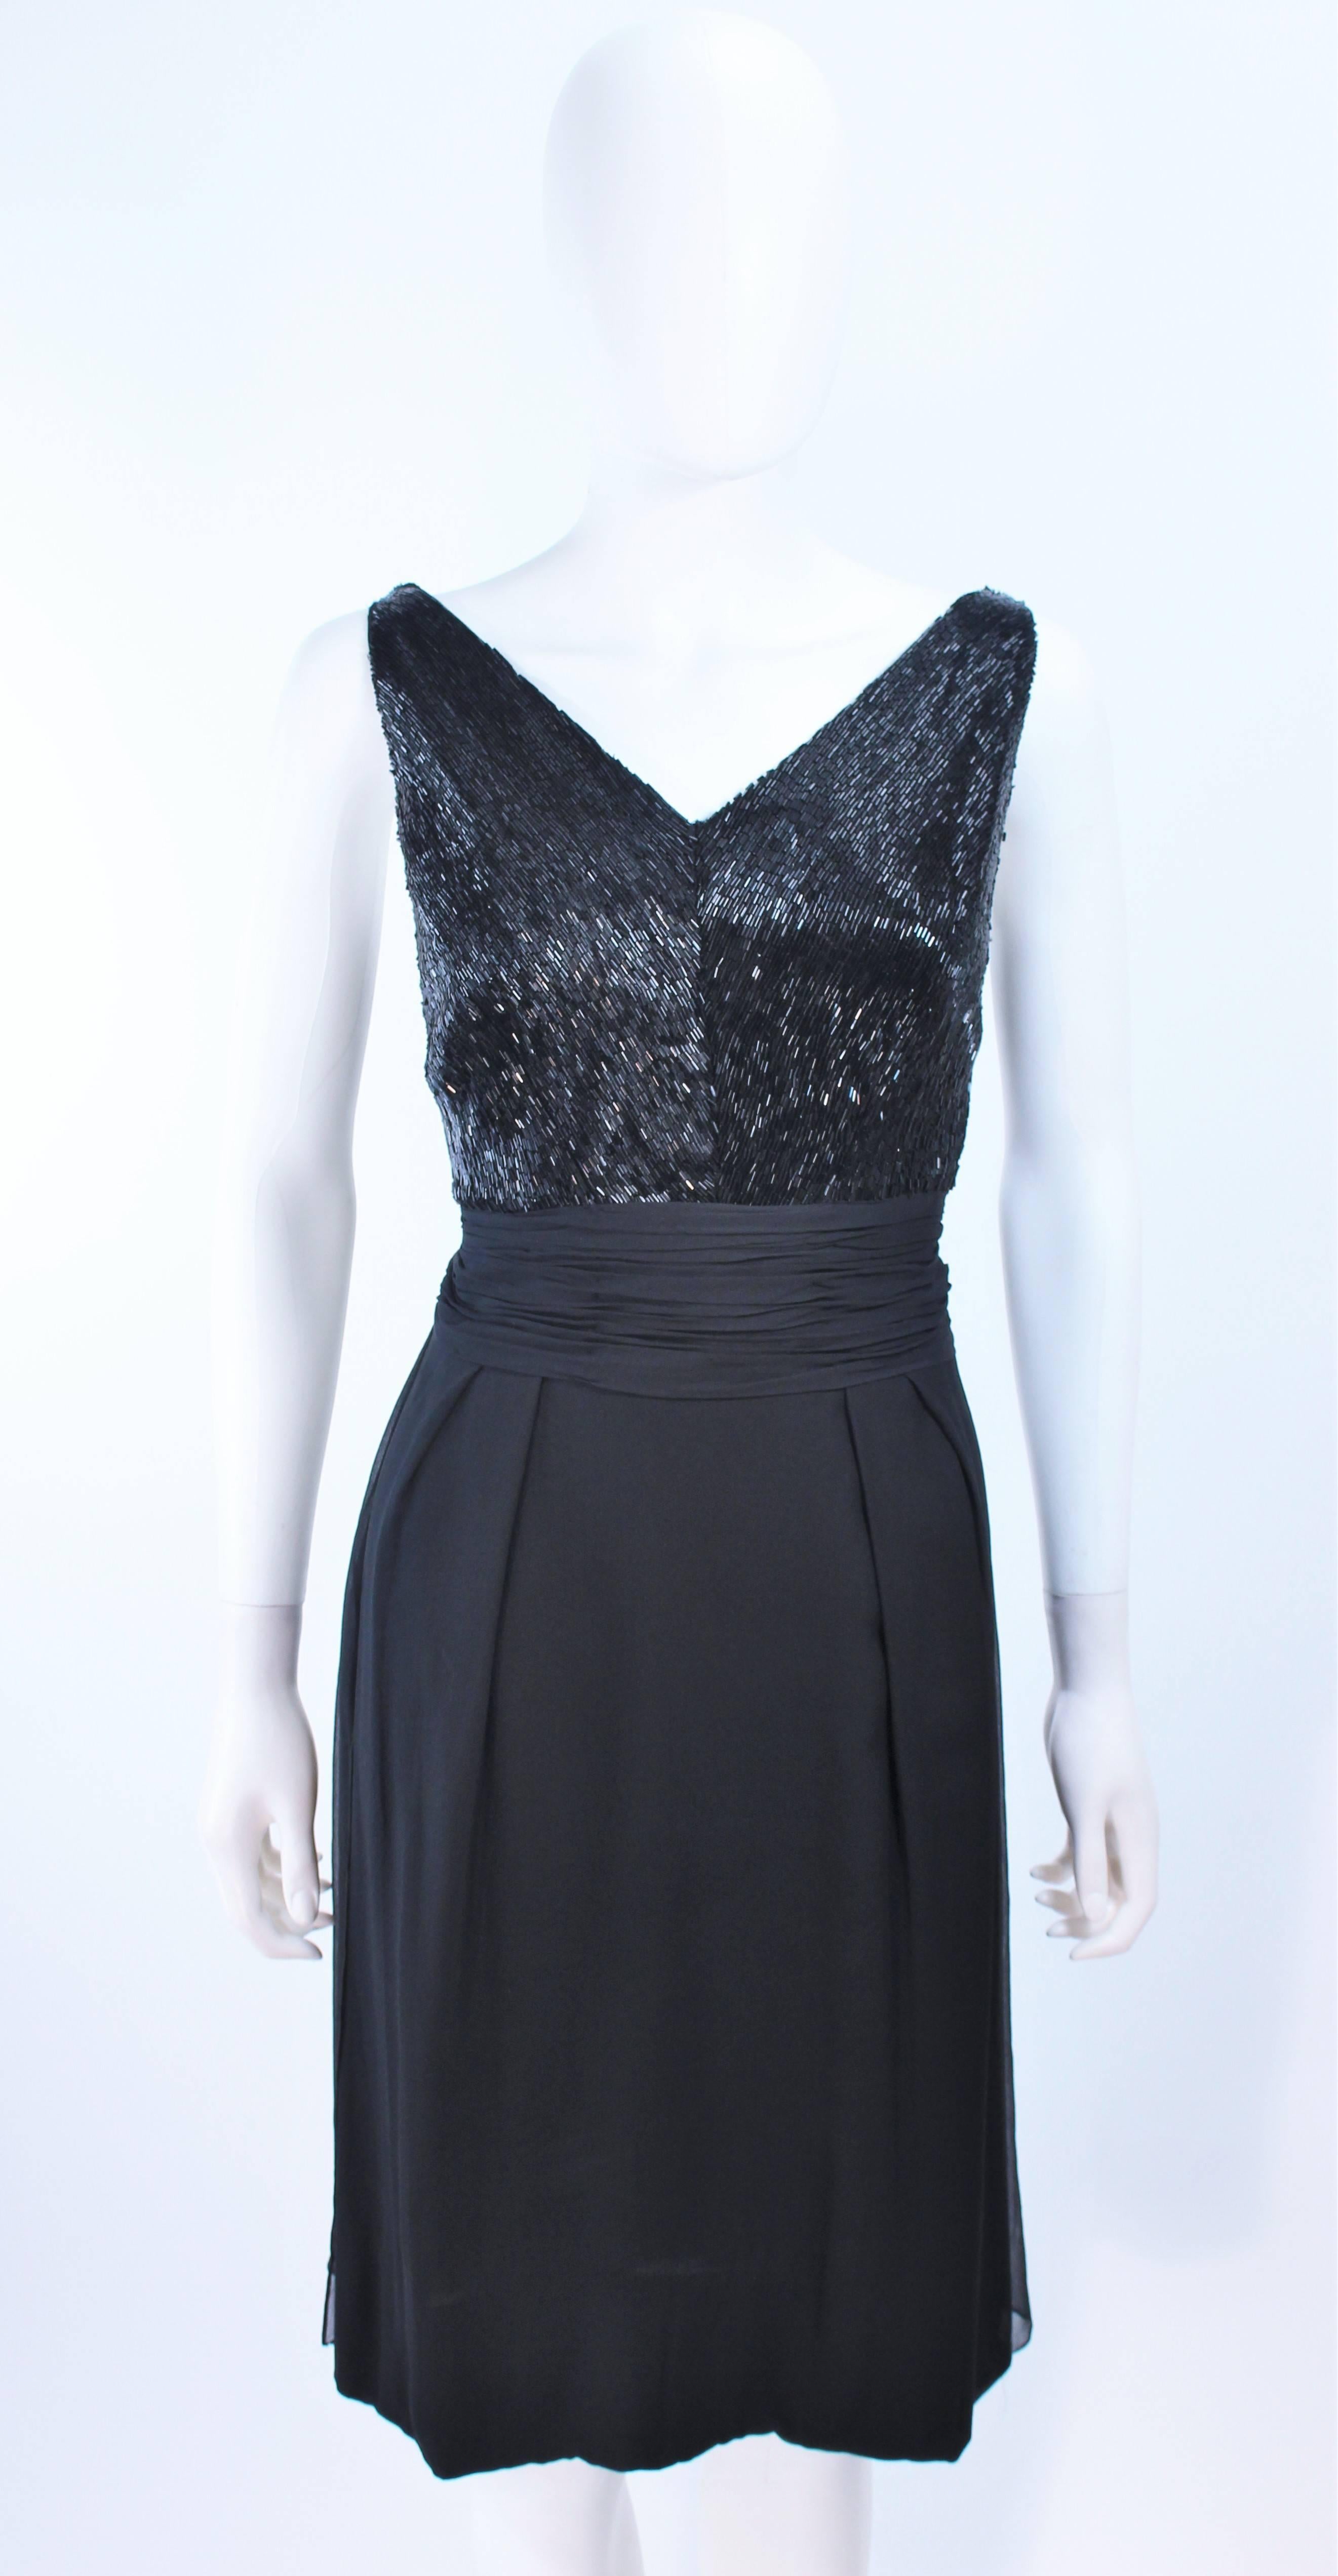 Vintage 1960's Black Beaded Silk Chiffon Cocktail Dress Size 6 In Excellent Condition For Sale In Los Angeles, CA